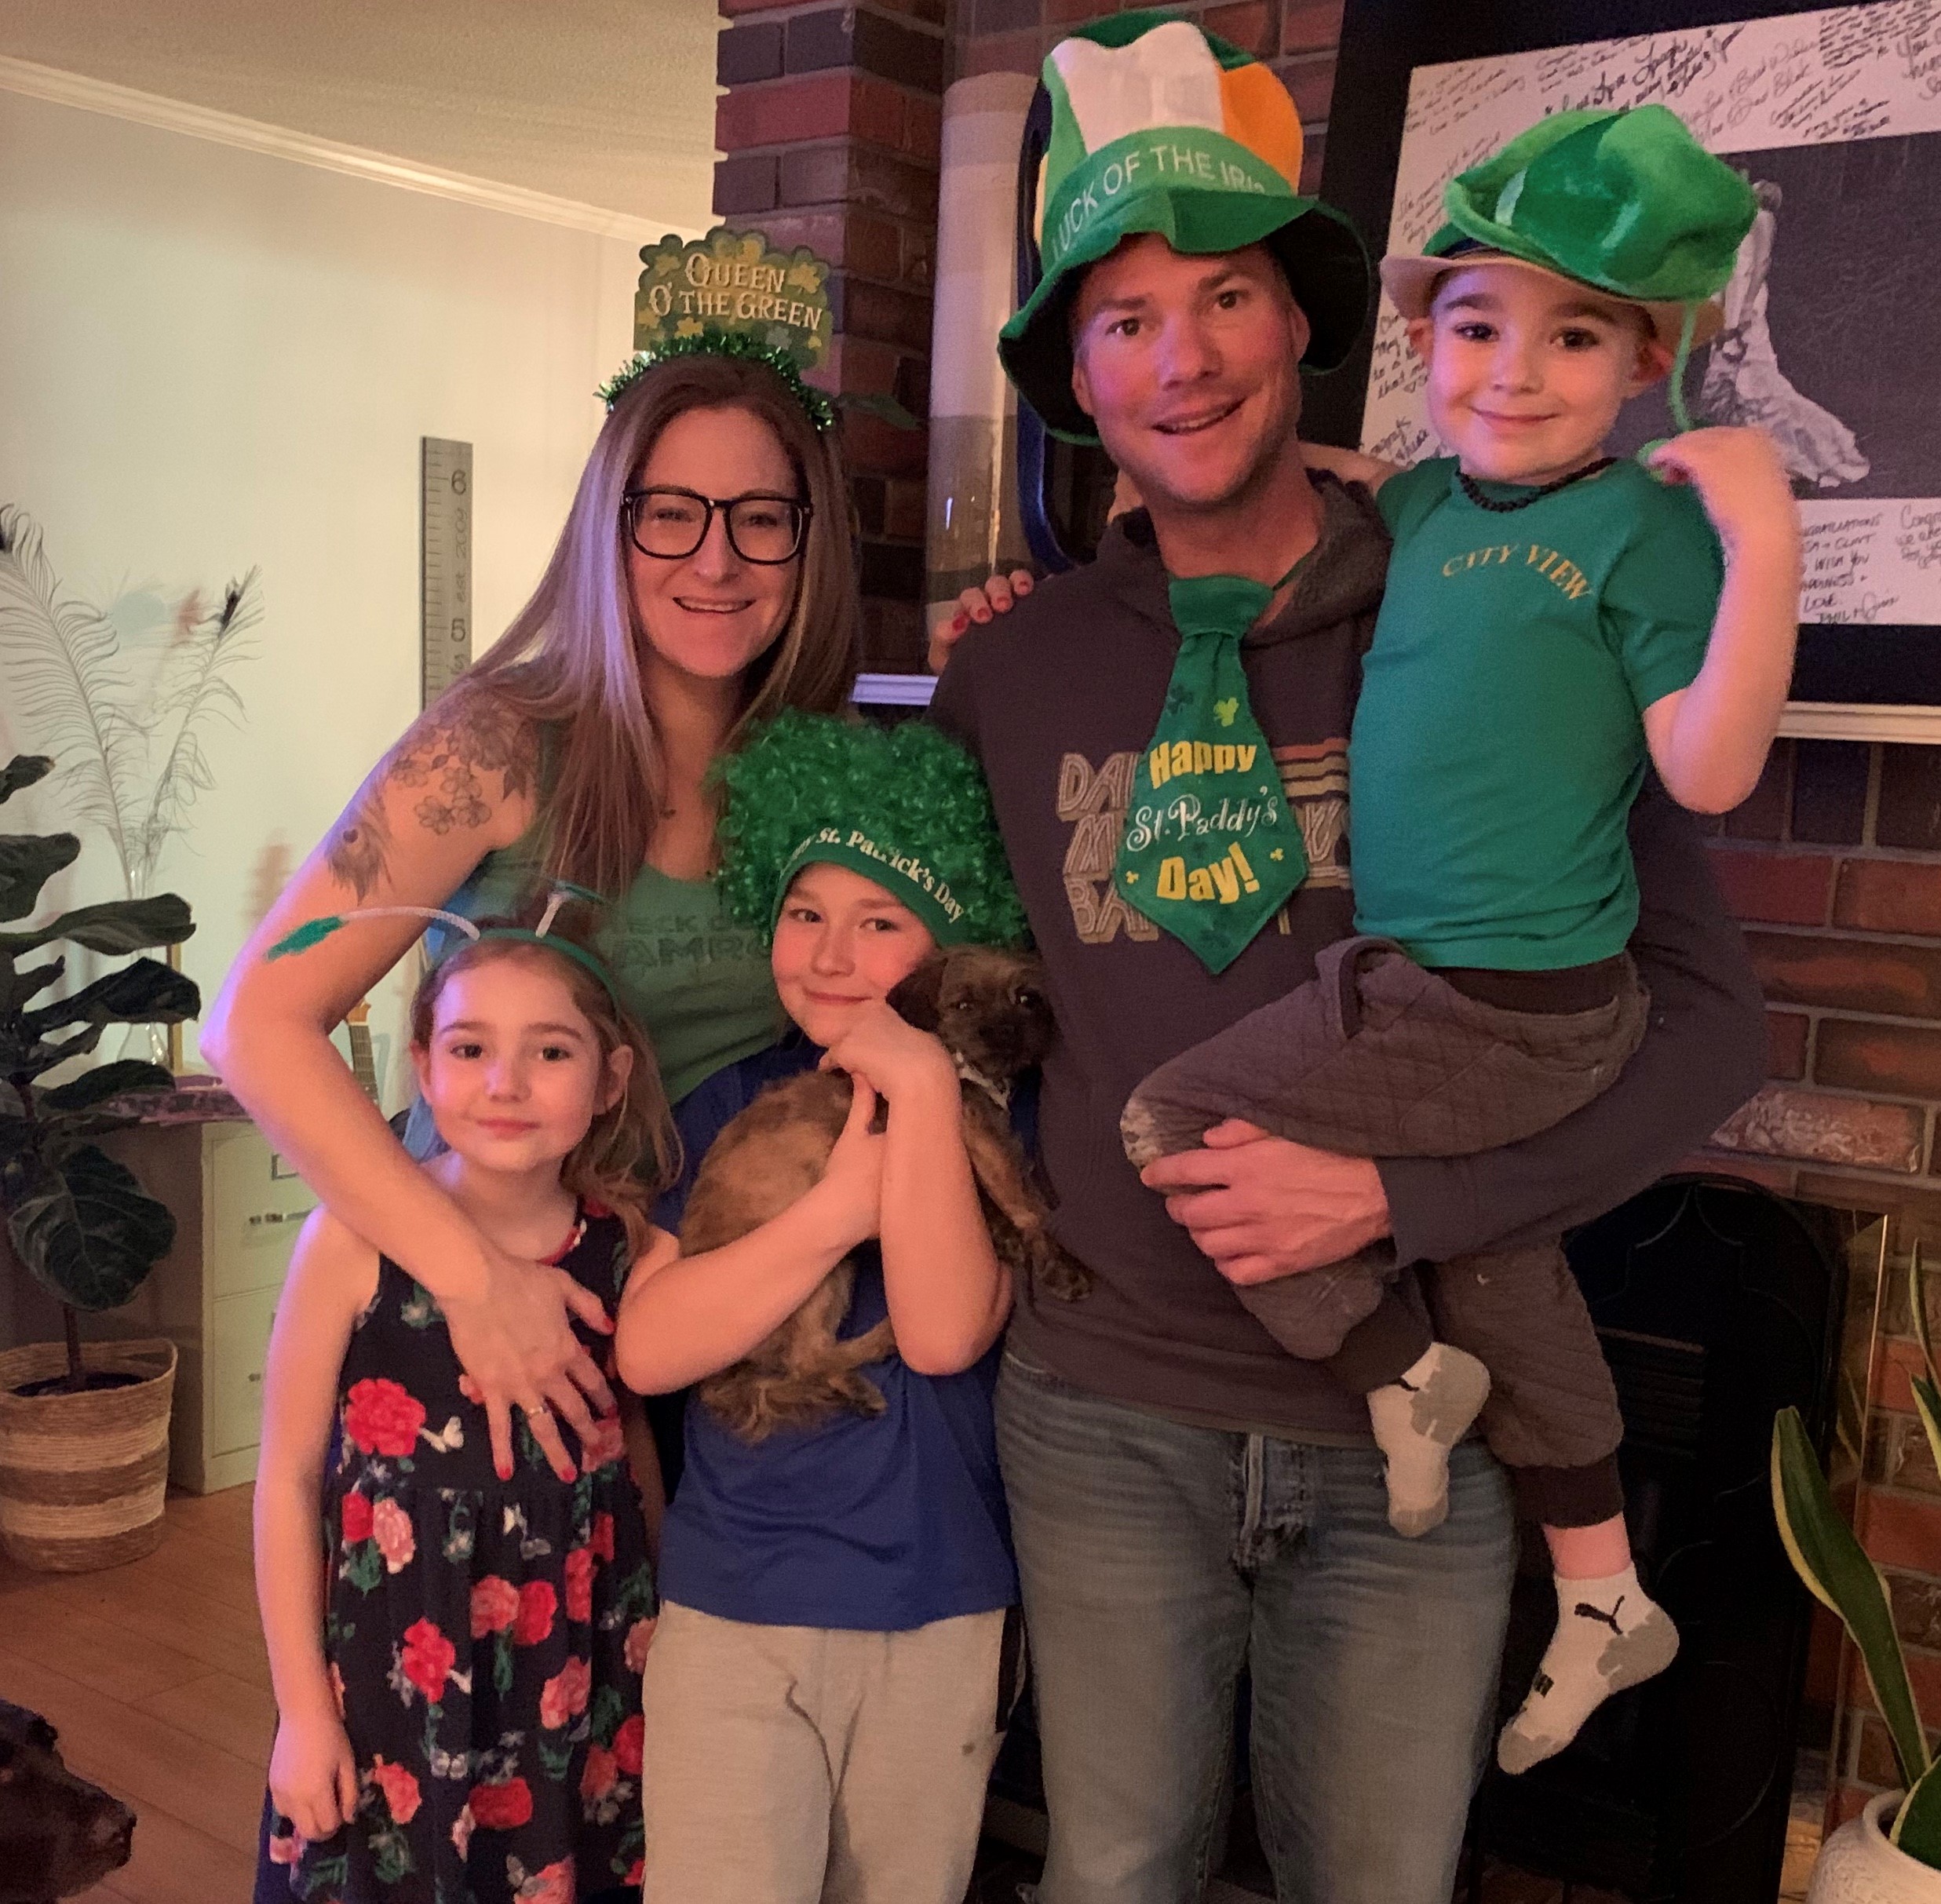 Clint and his family celebrate St. Patrick’s Day